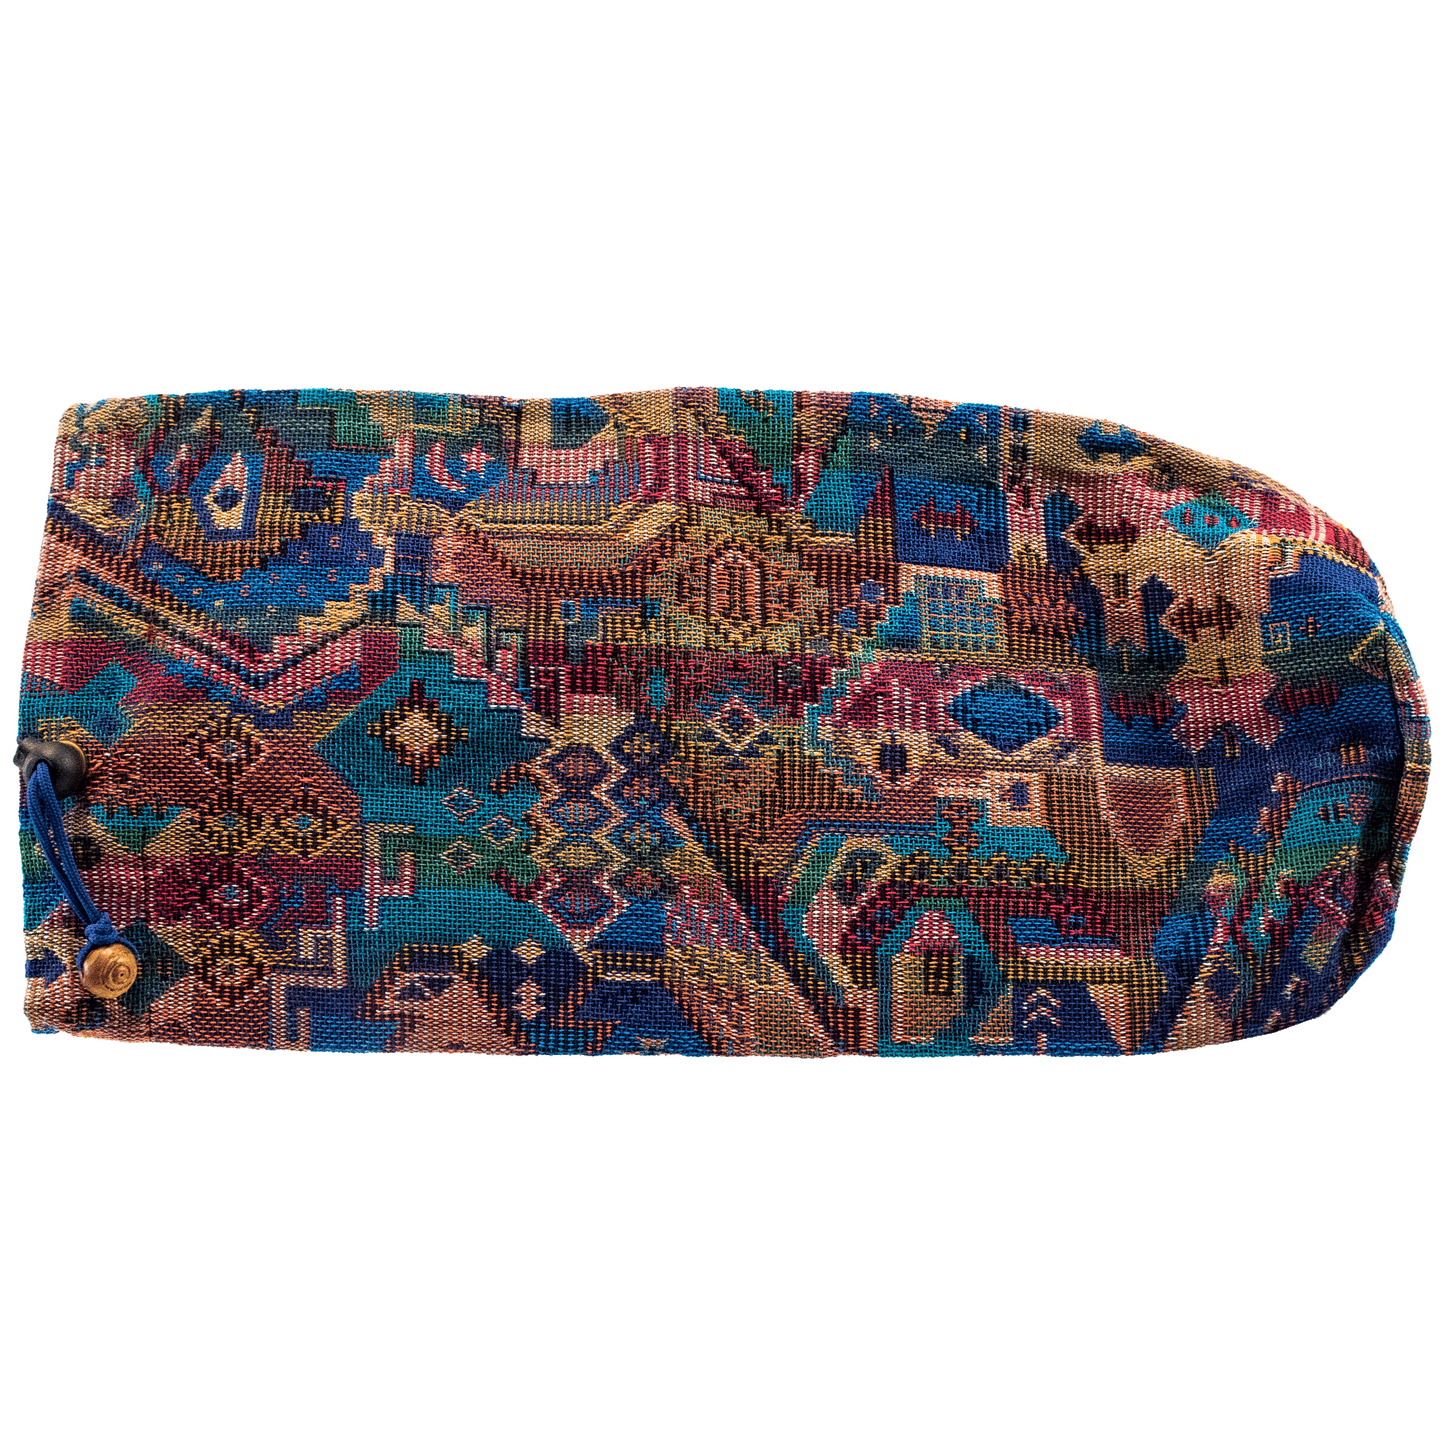 17 Inch Shofar Bag with rainbow Tribal Pattern and blue string